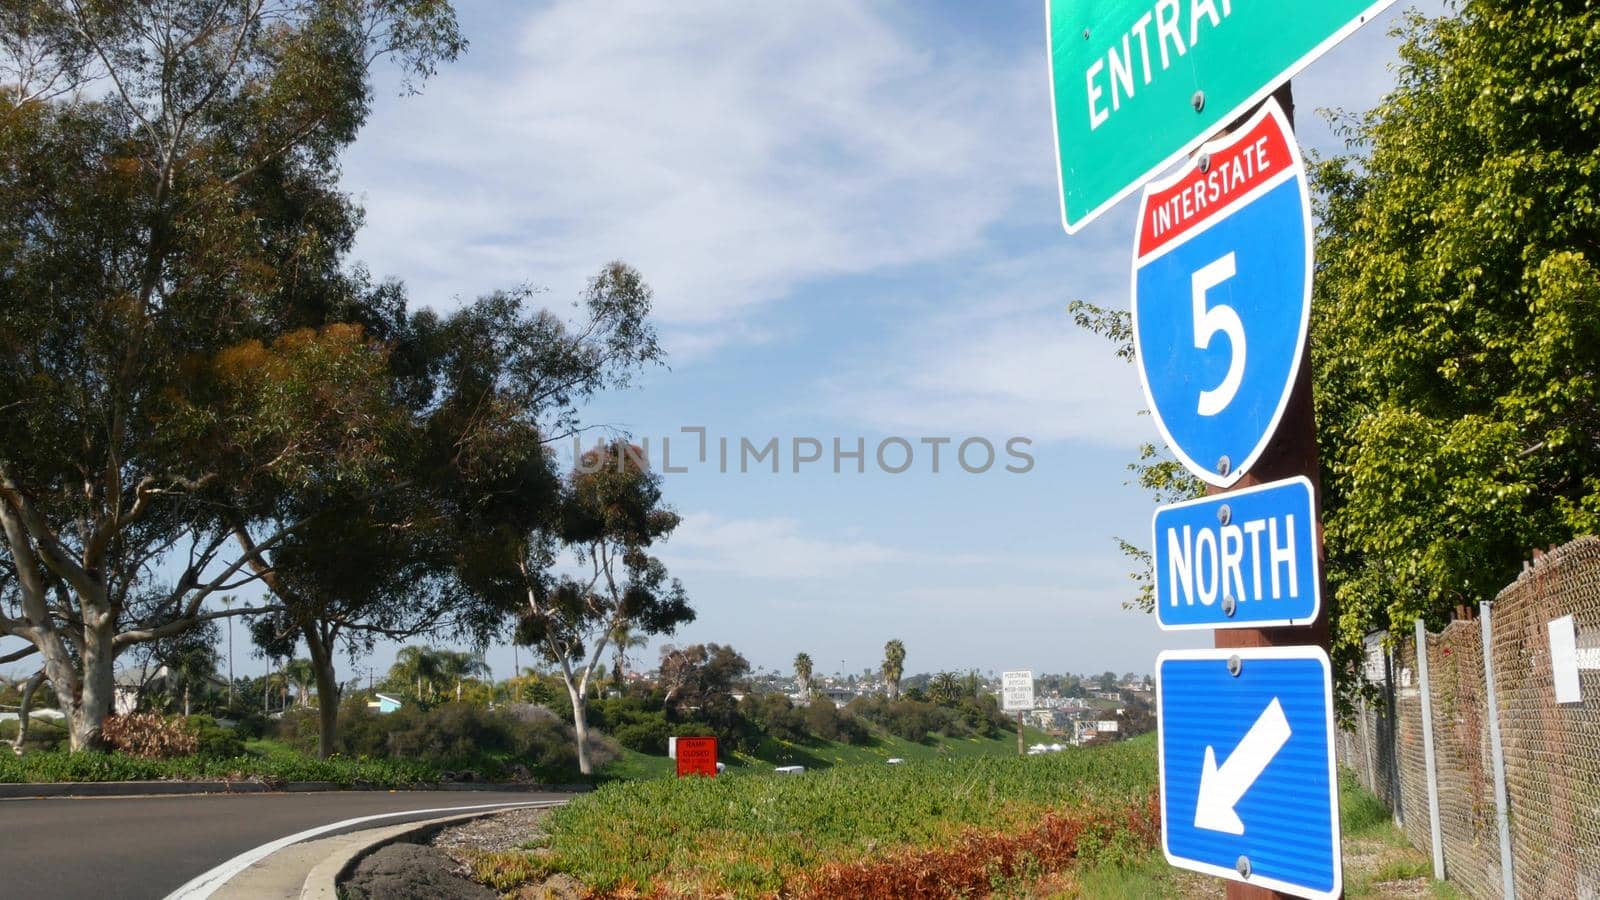 Freeway entrance, information sign on crossraod in USA. Route to Los Angeles, California. Interstate highway 5 signpost as symbol of road trip, transportation and traffic safety rules and regulations.